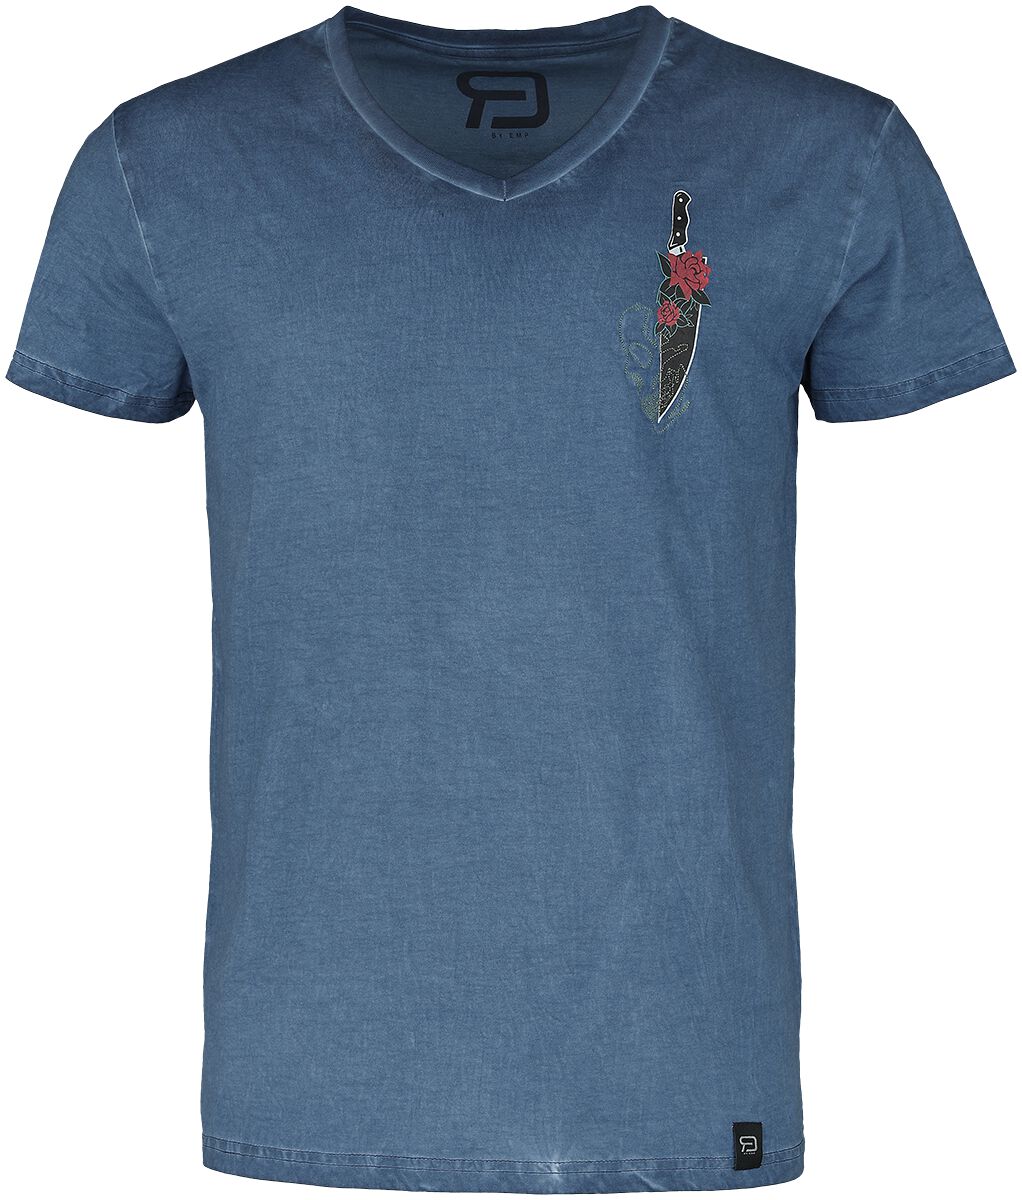 Image of T-Shirt di RED by EMP - T-shirt with dagger and embroidery detail - S a 5XL - Uomo - blu